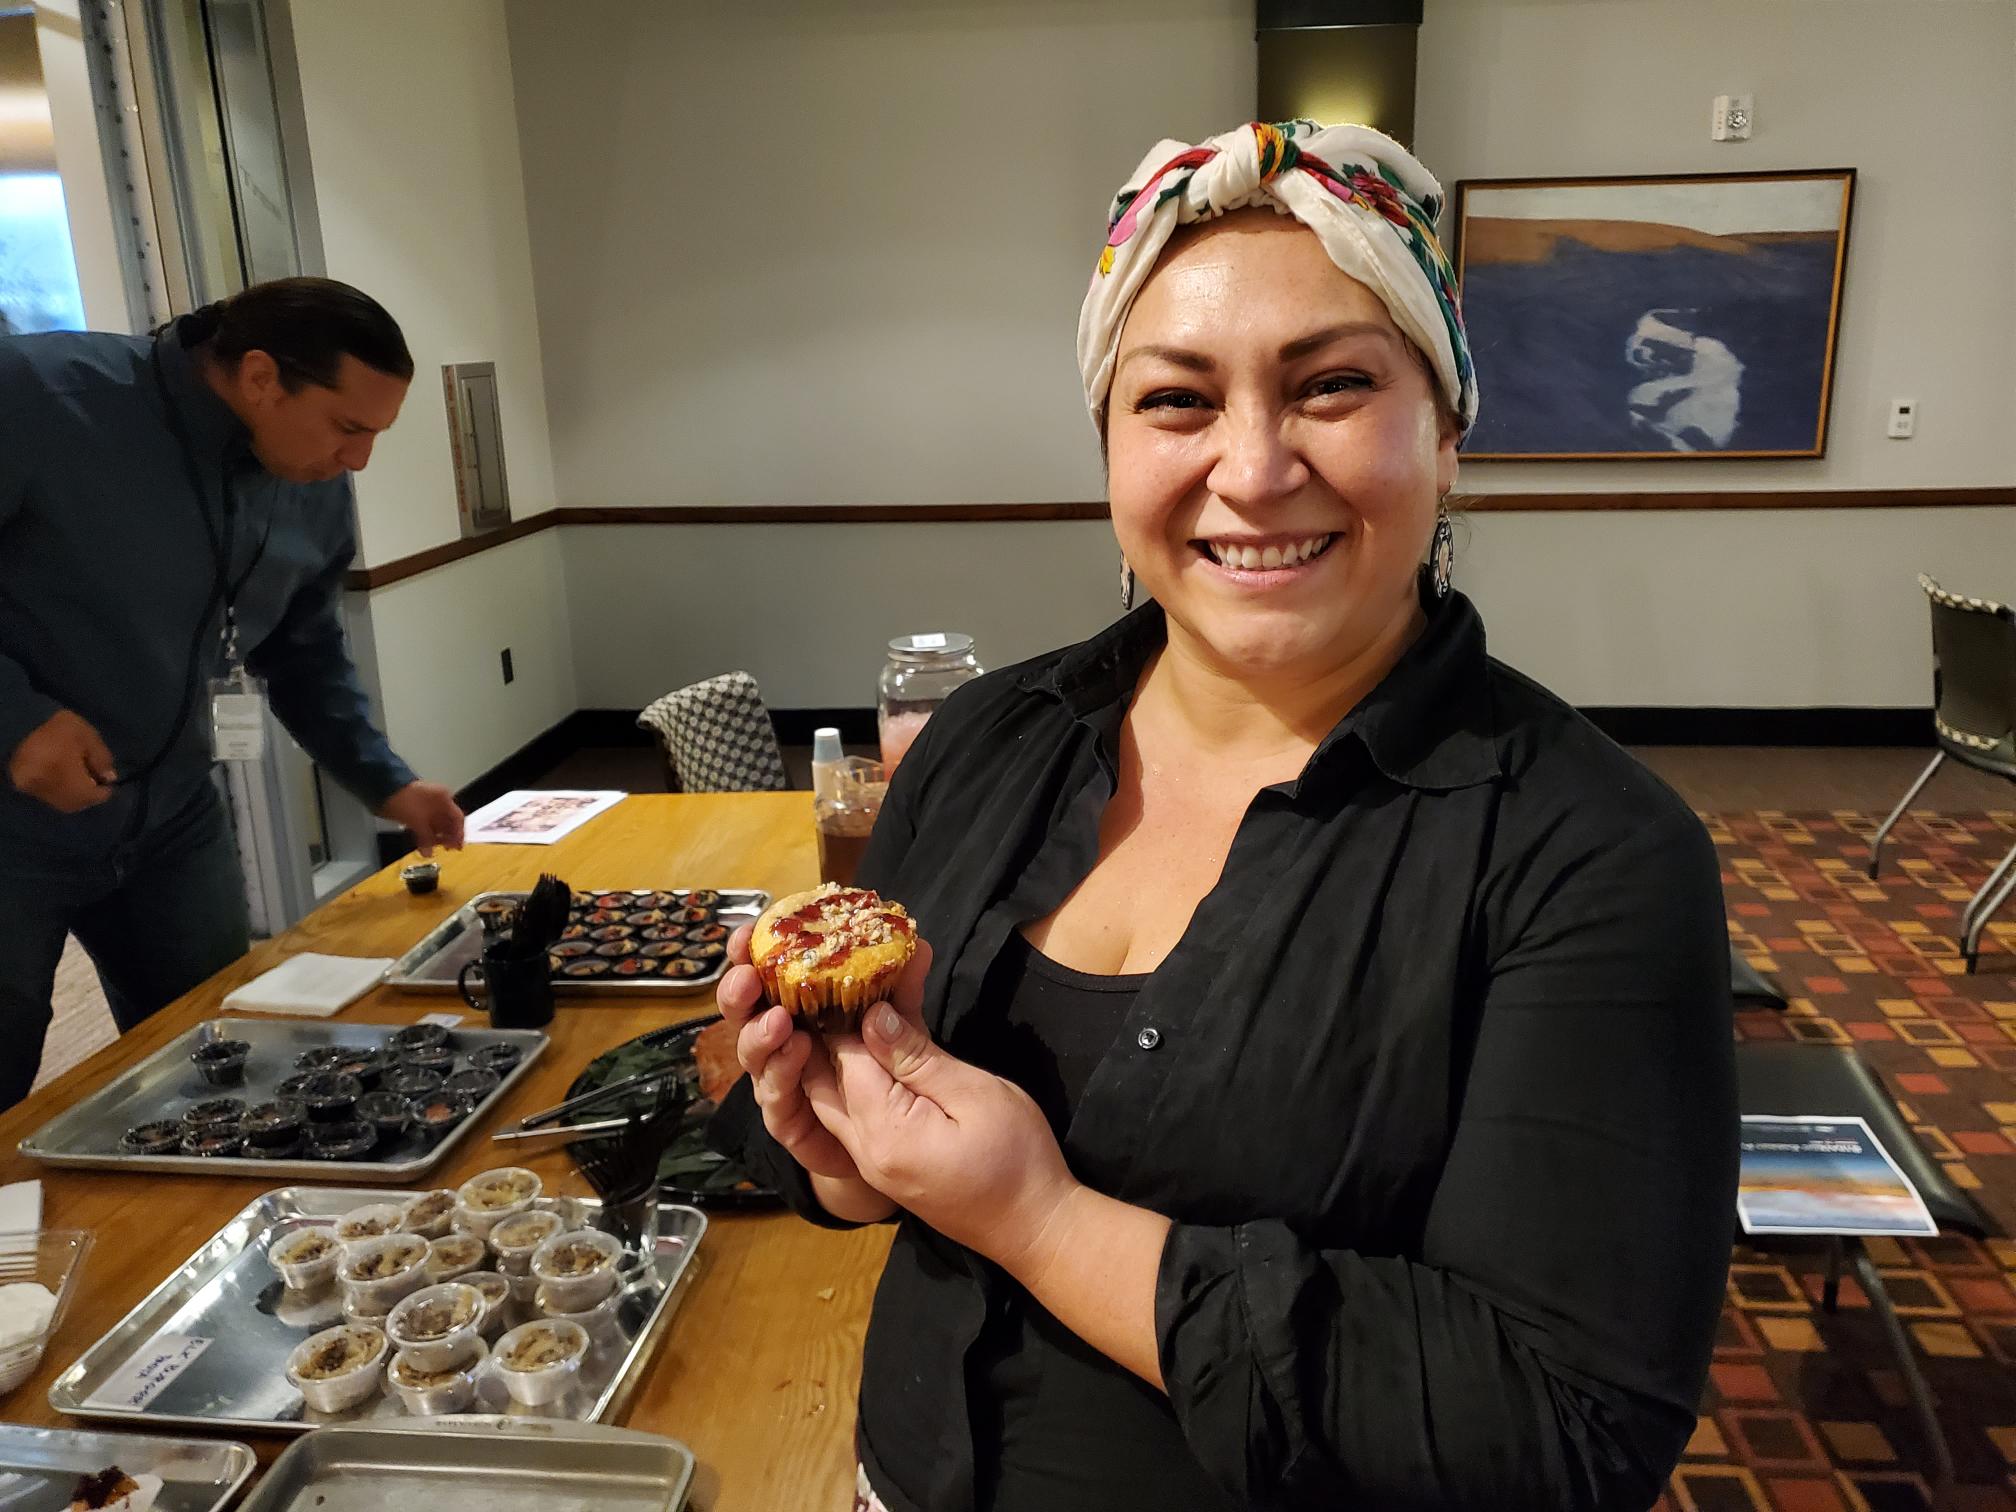 Native Woman in a colorful headscarf holds muffins on a tray